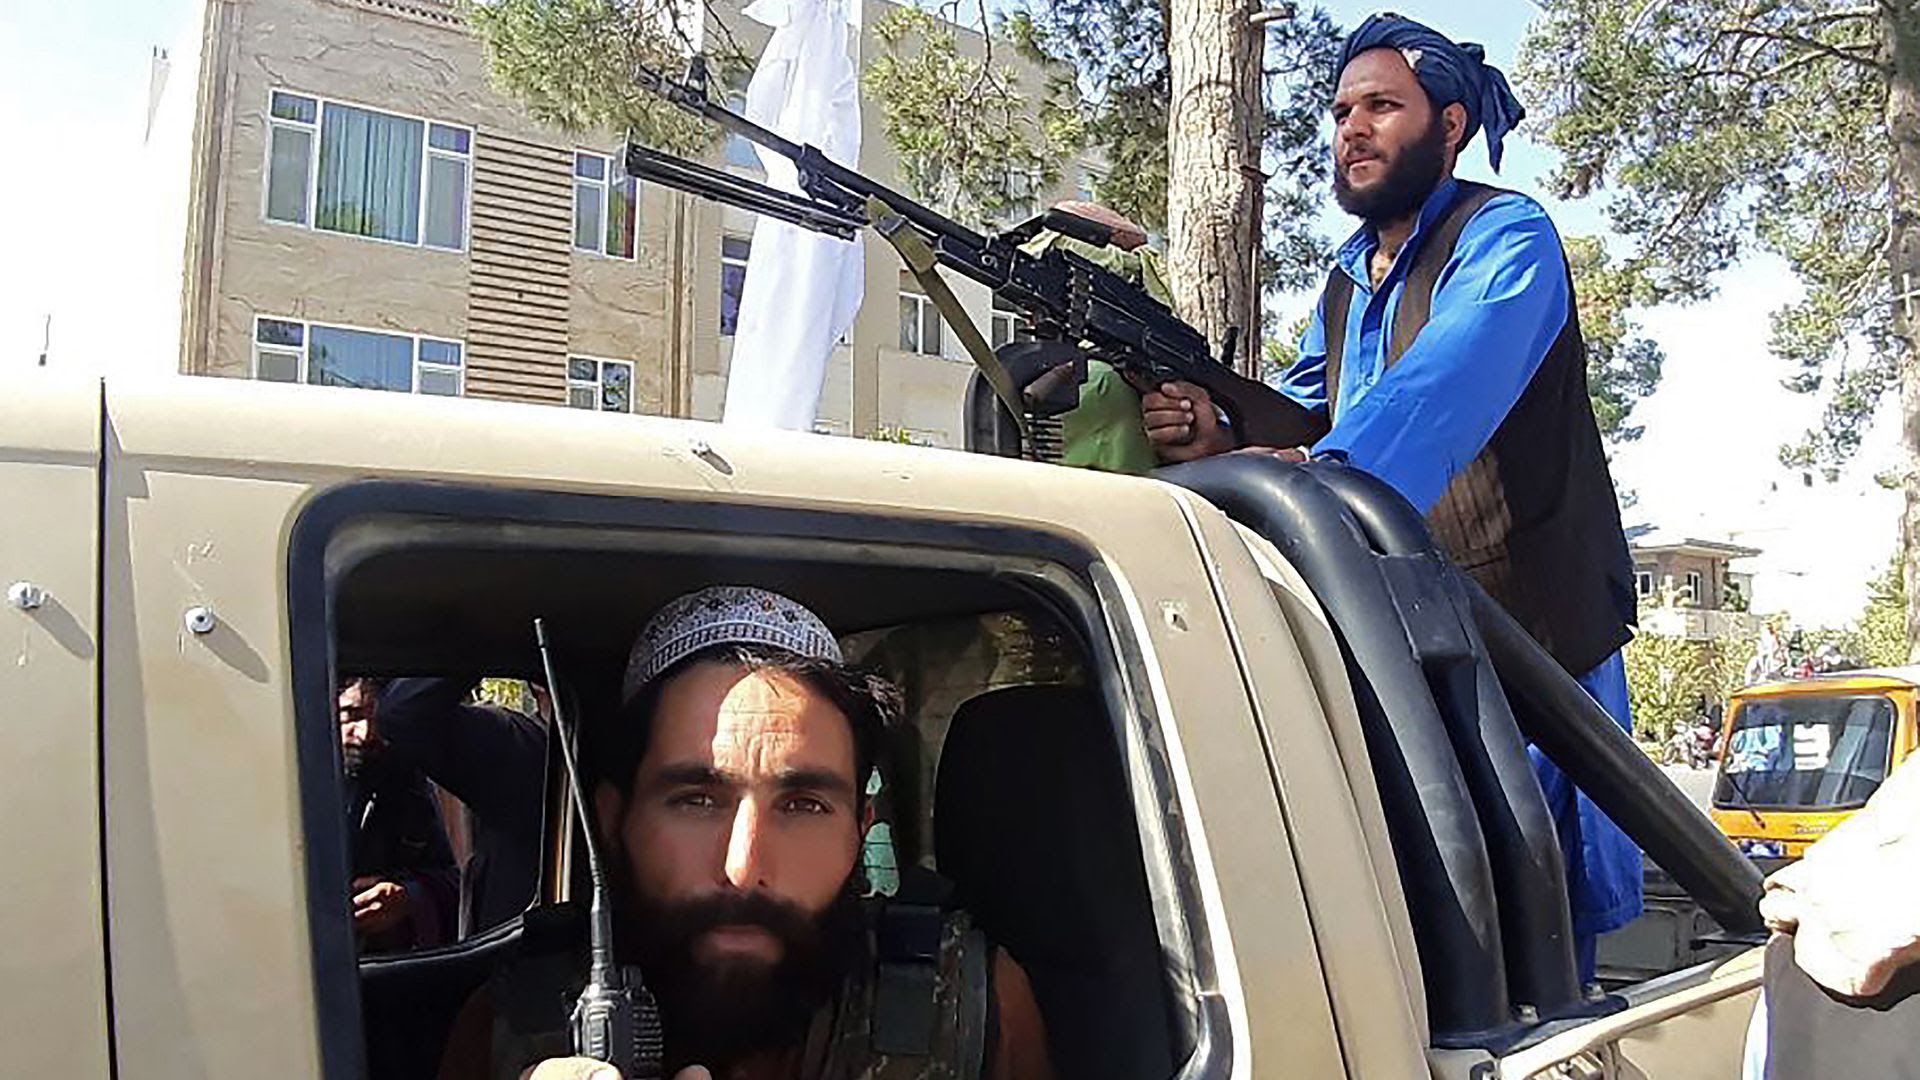 Taliban fighters in and on a car